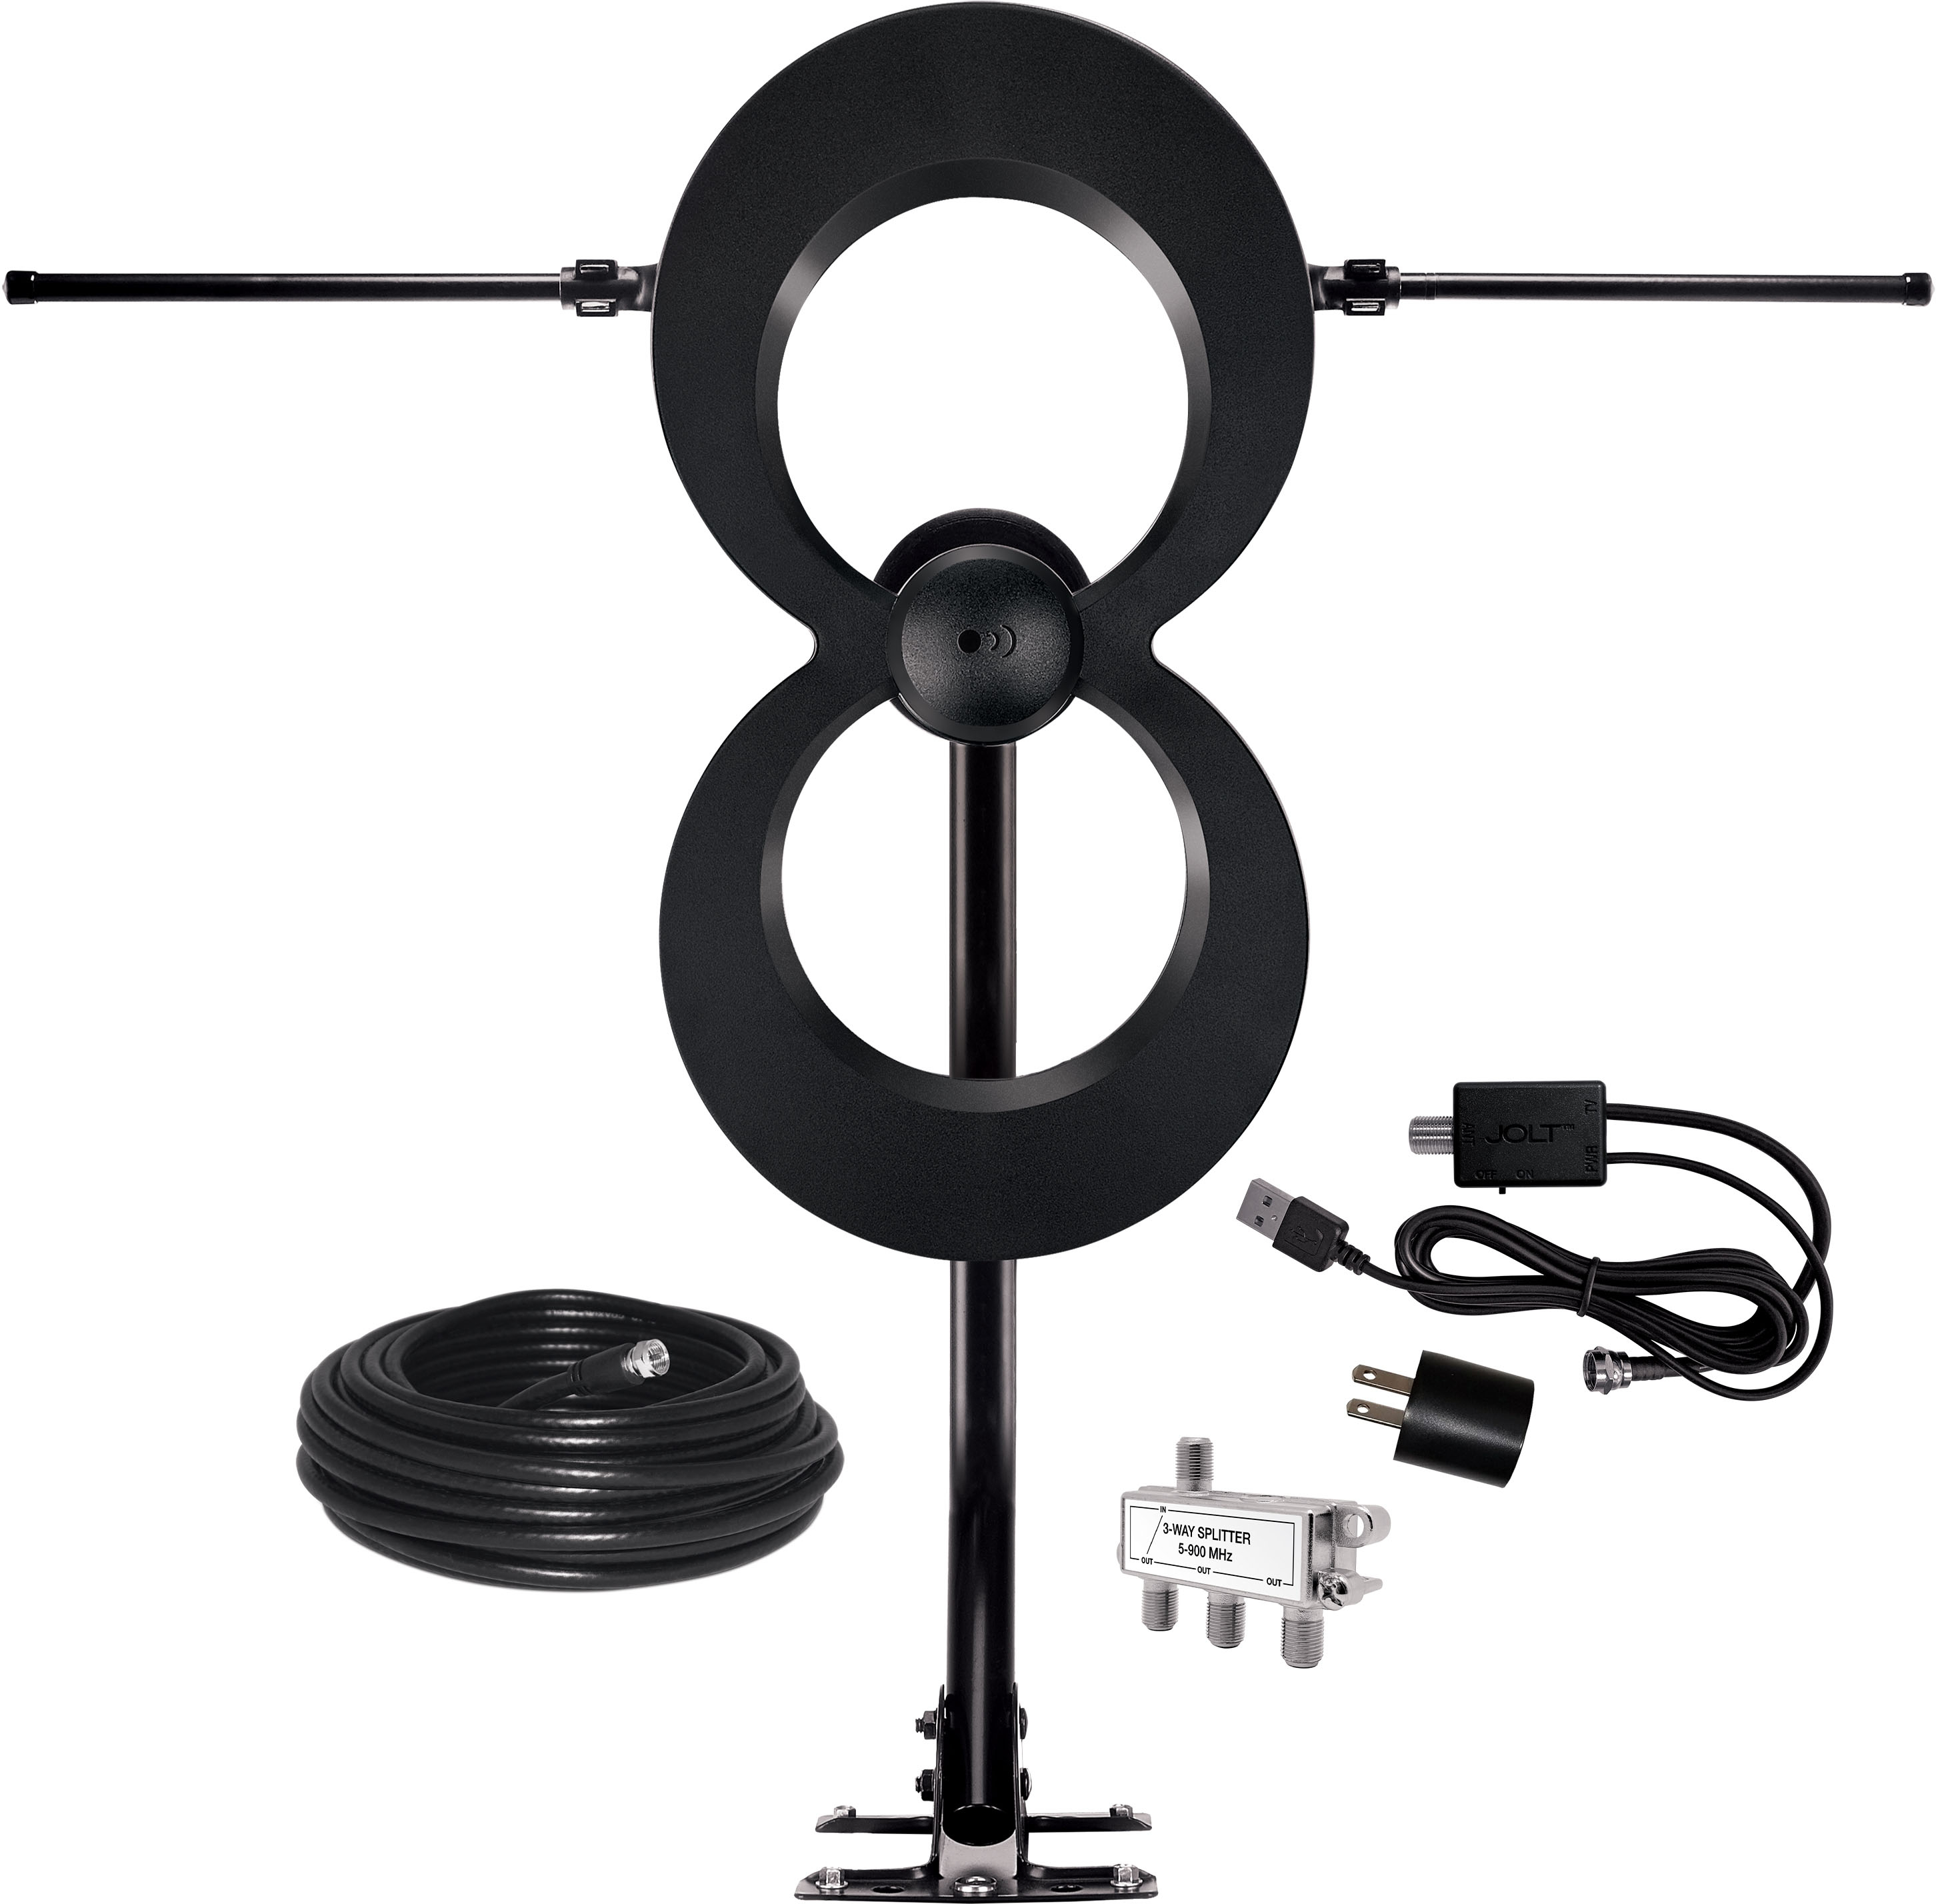 TV Antenna Outdoor 75 Matching / VHF/ FM Cable 